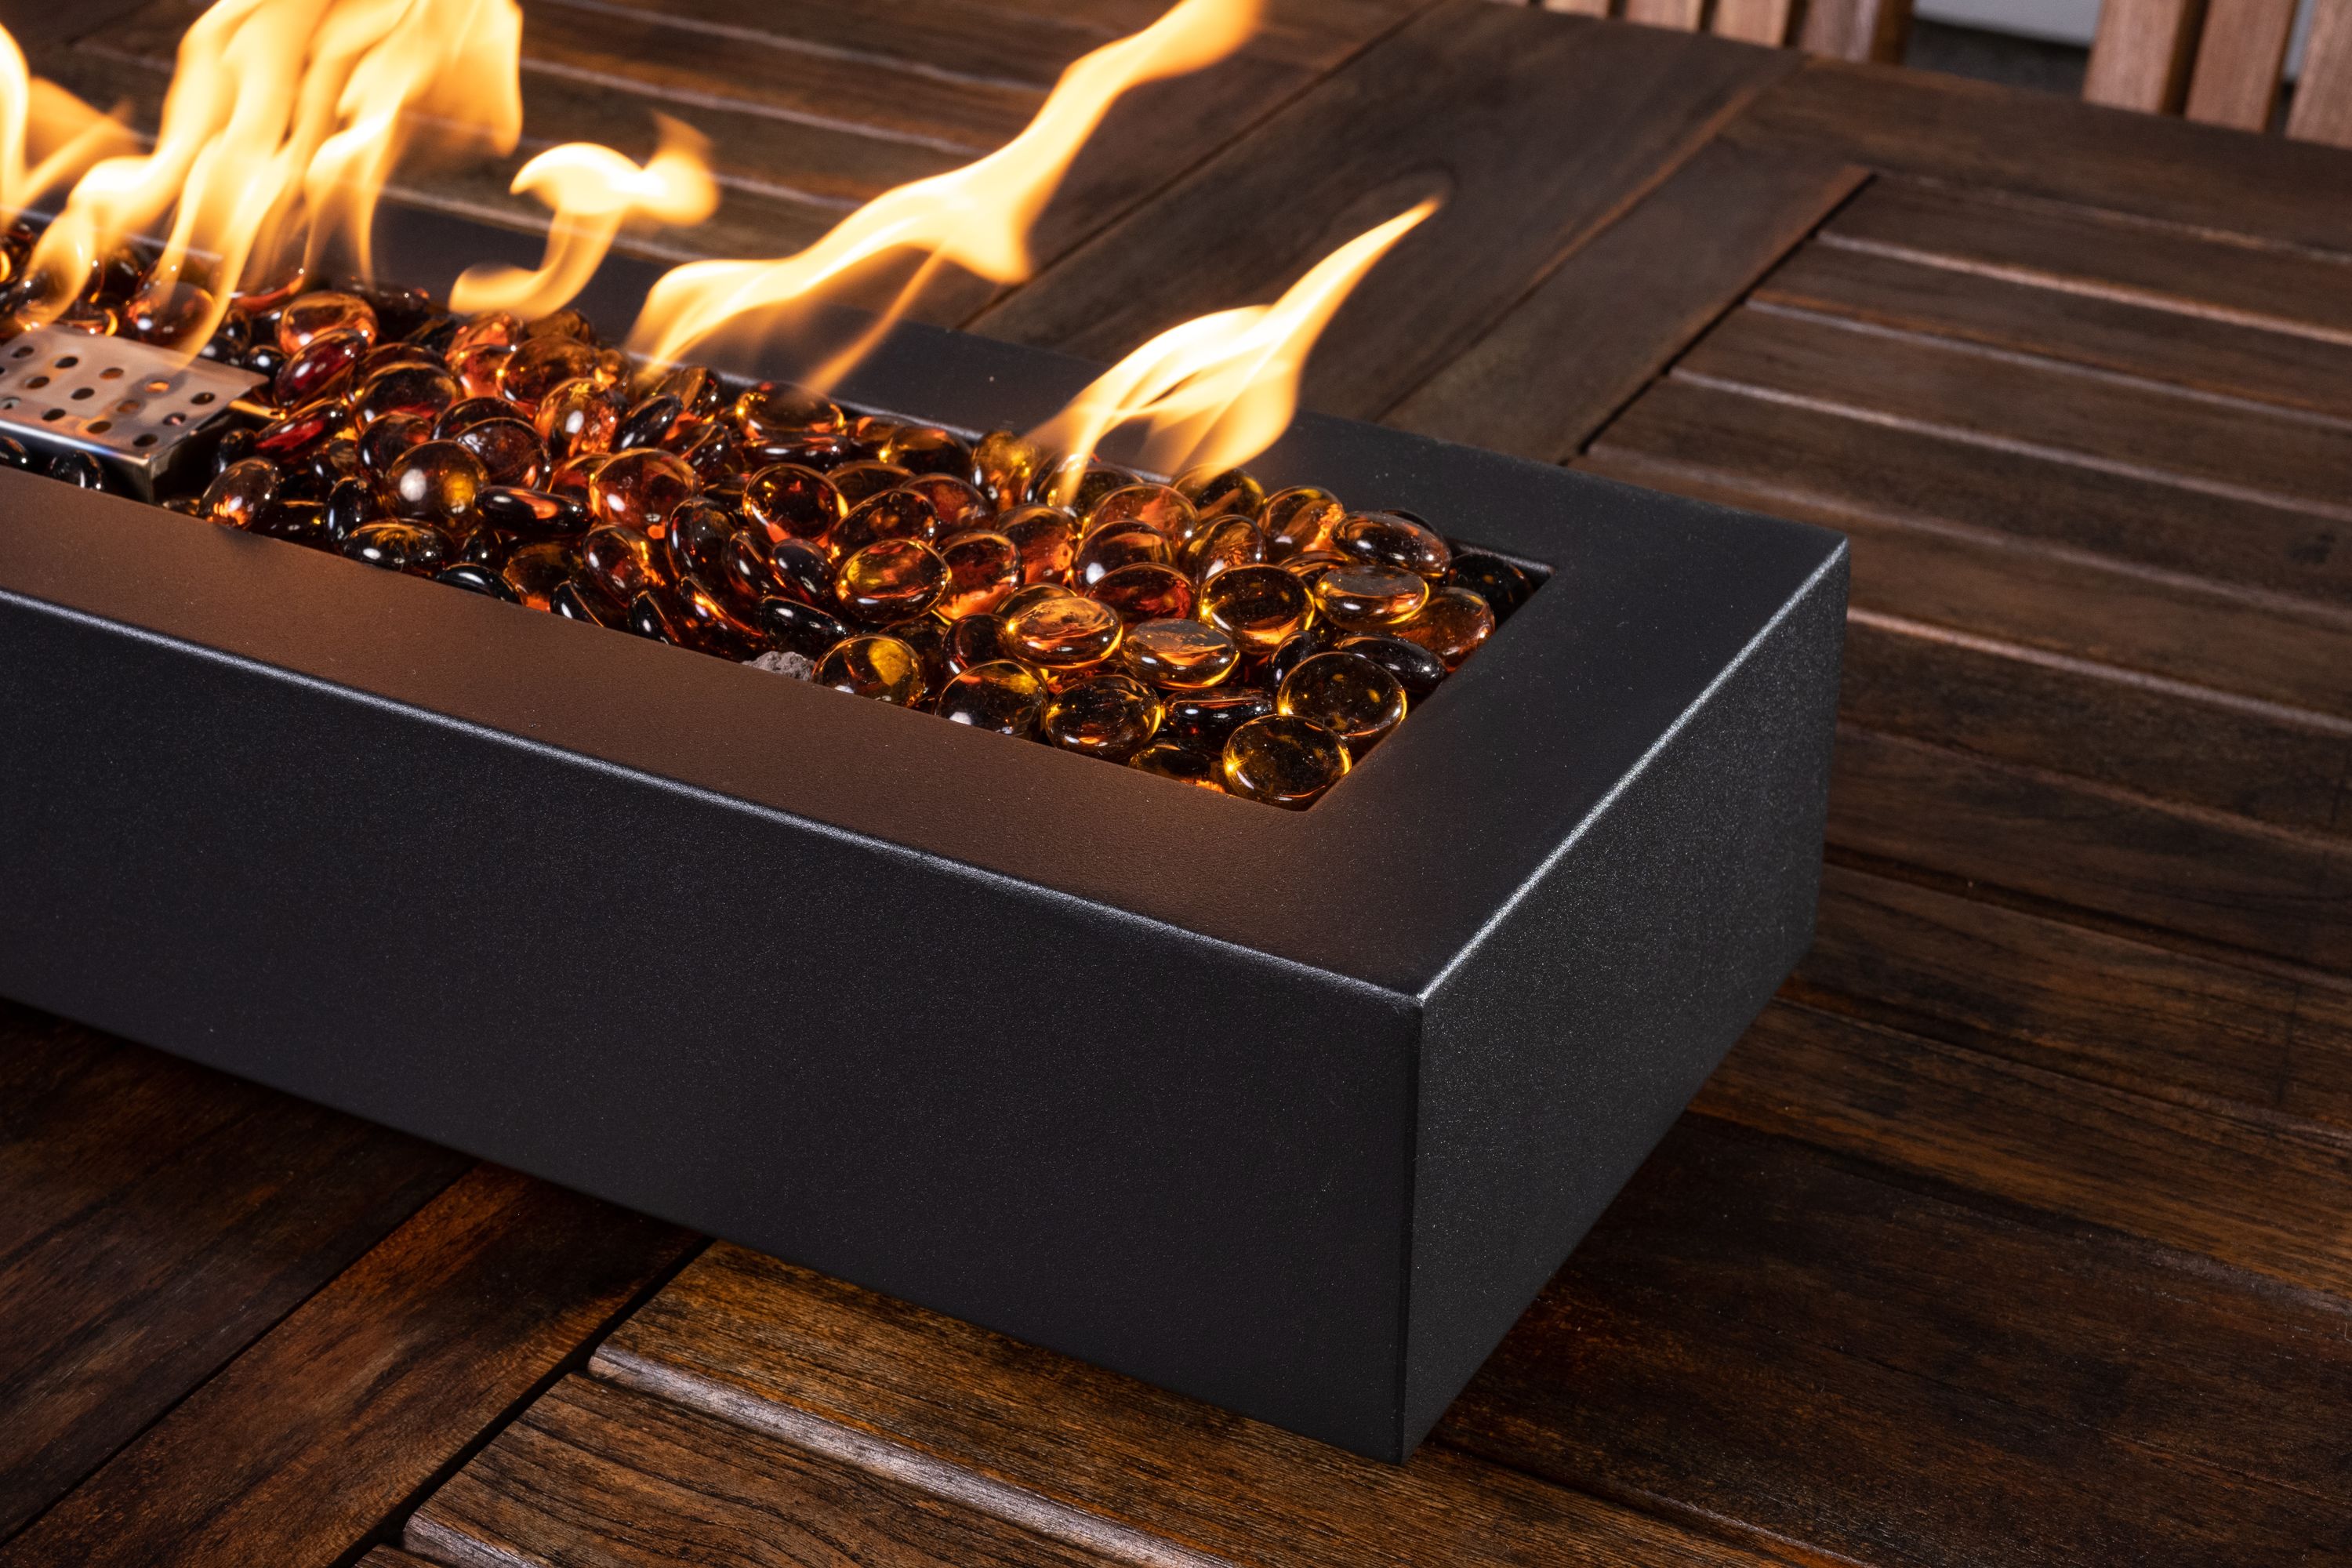 Lara 20 in. x 7 in. x 8.1 in. Rectangle Table Top Fire Bowl